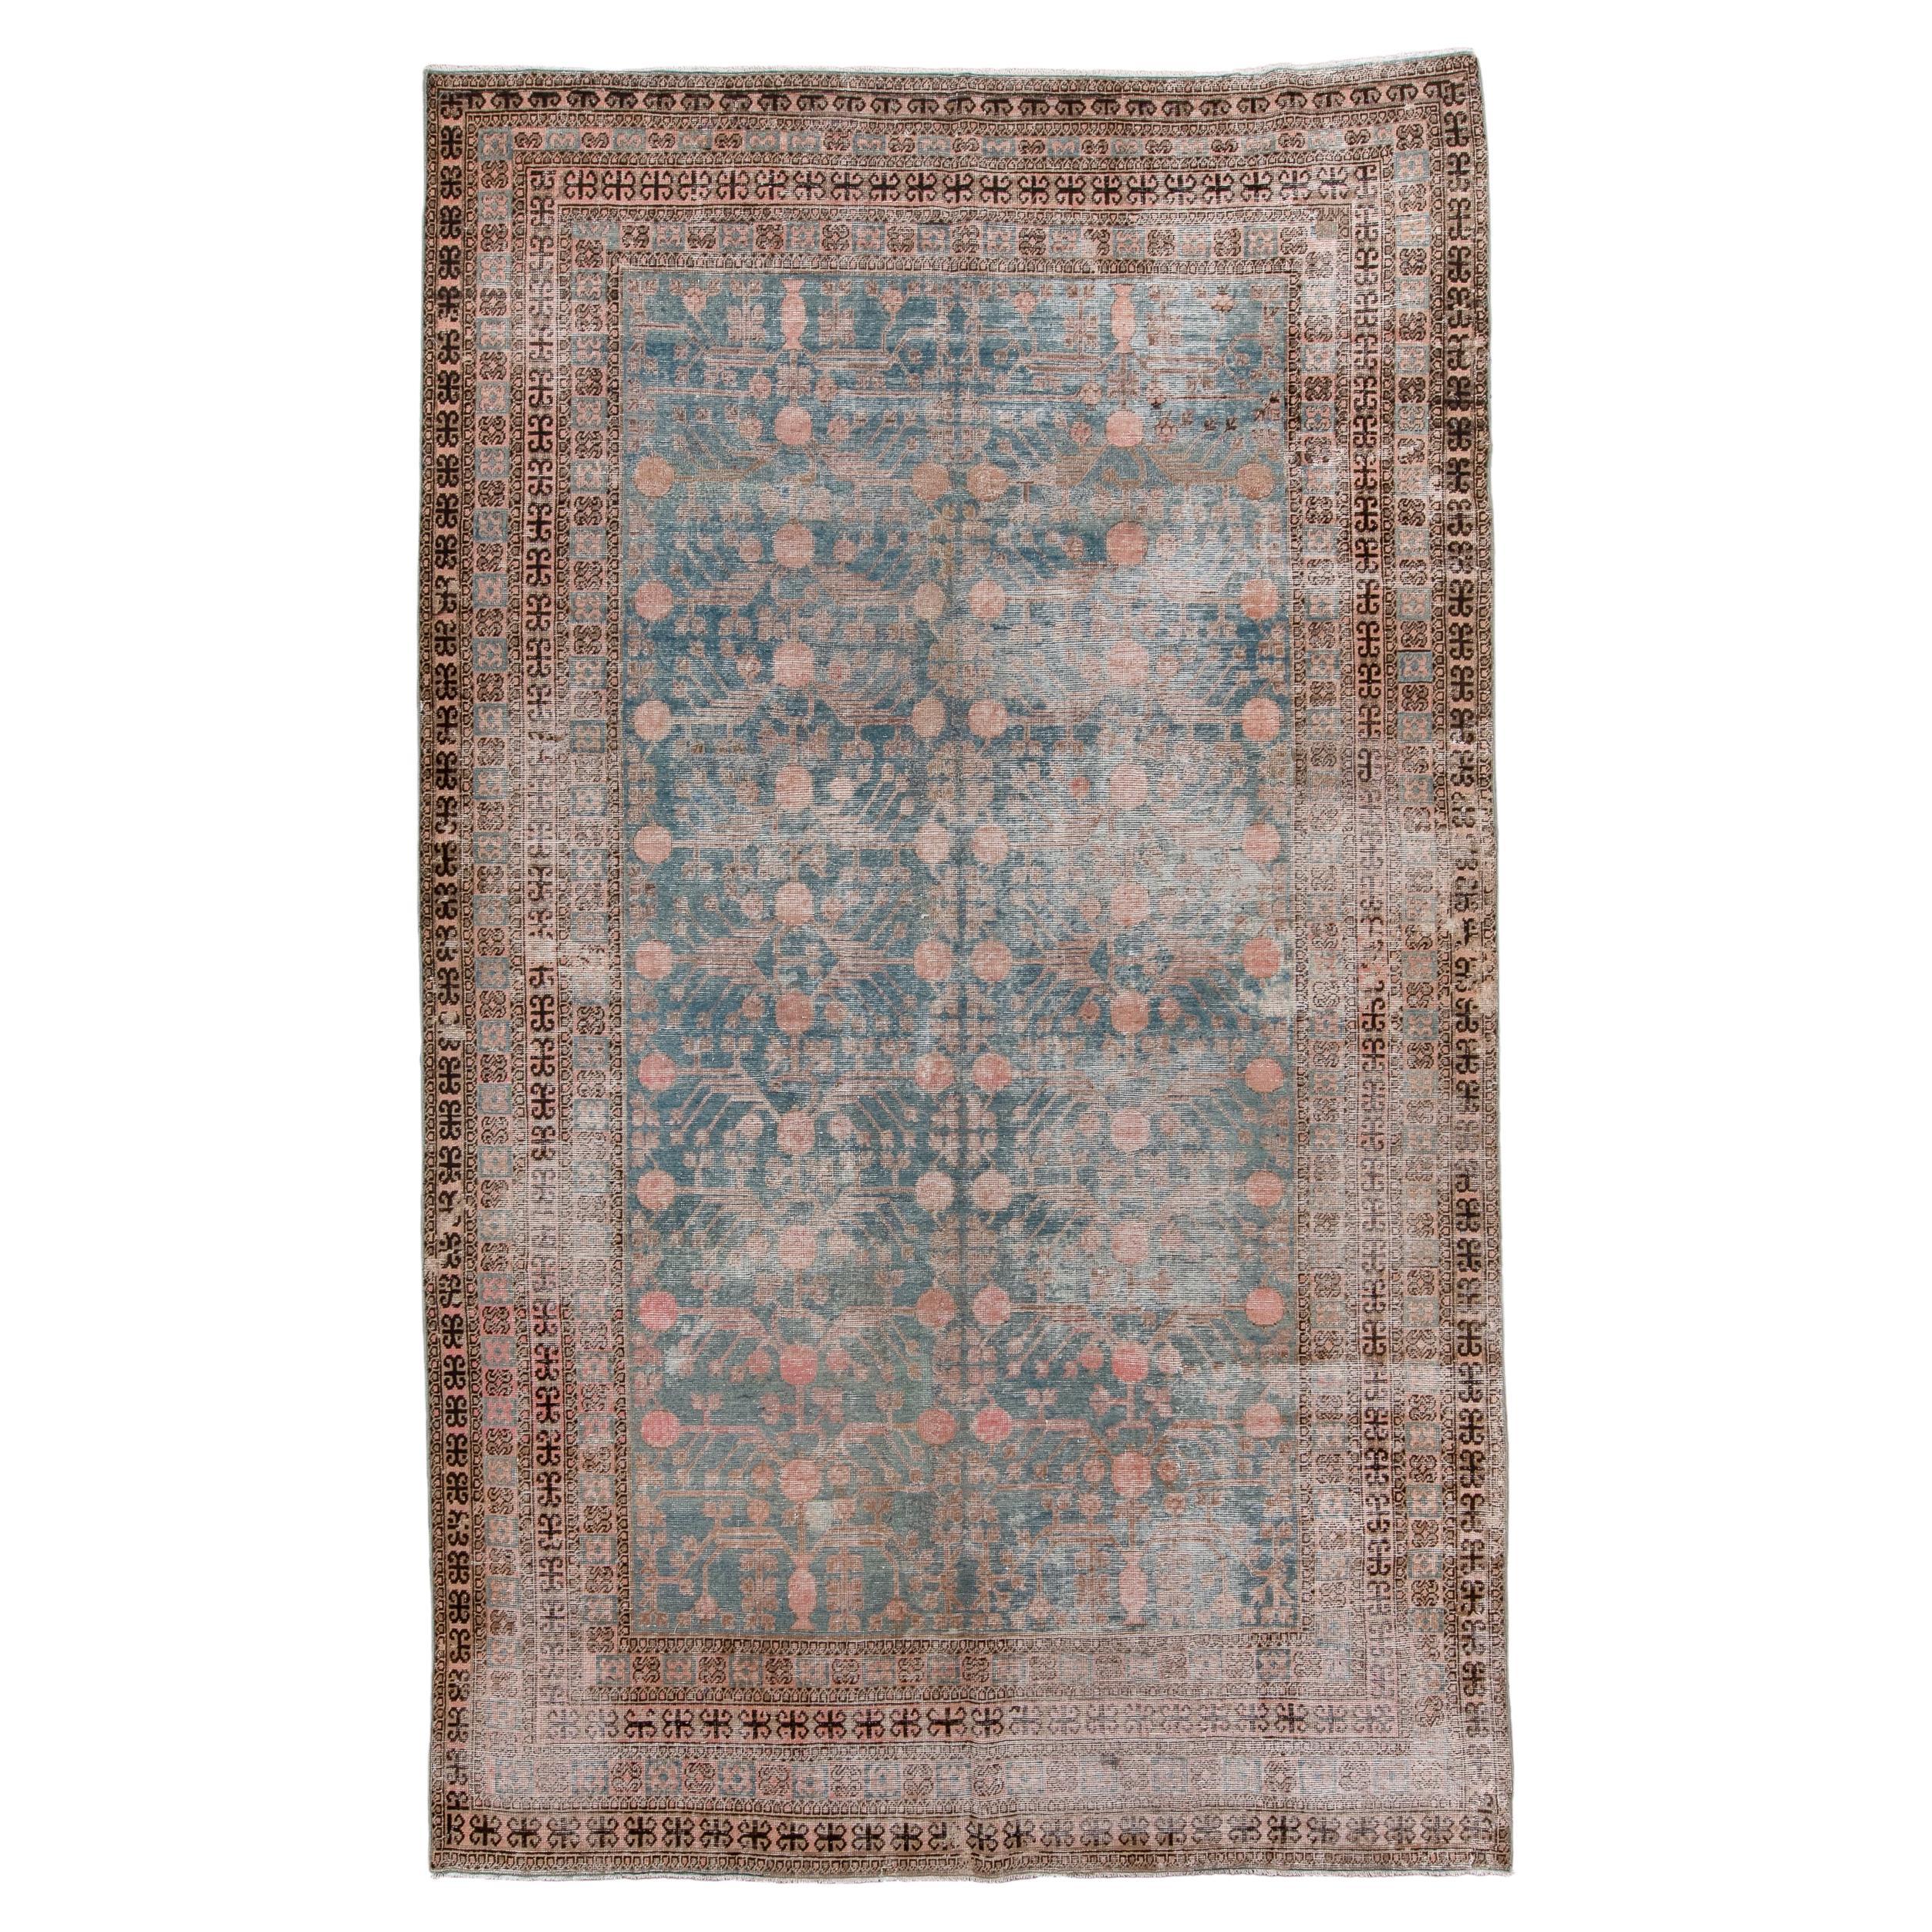 Antique Distressed Khotan Rug with Pomegranate Trees 